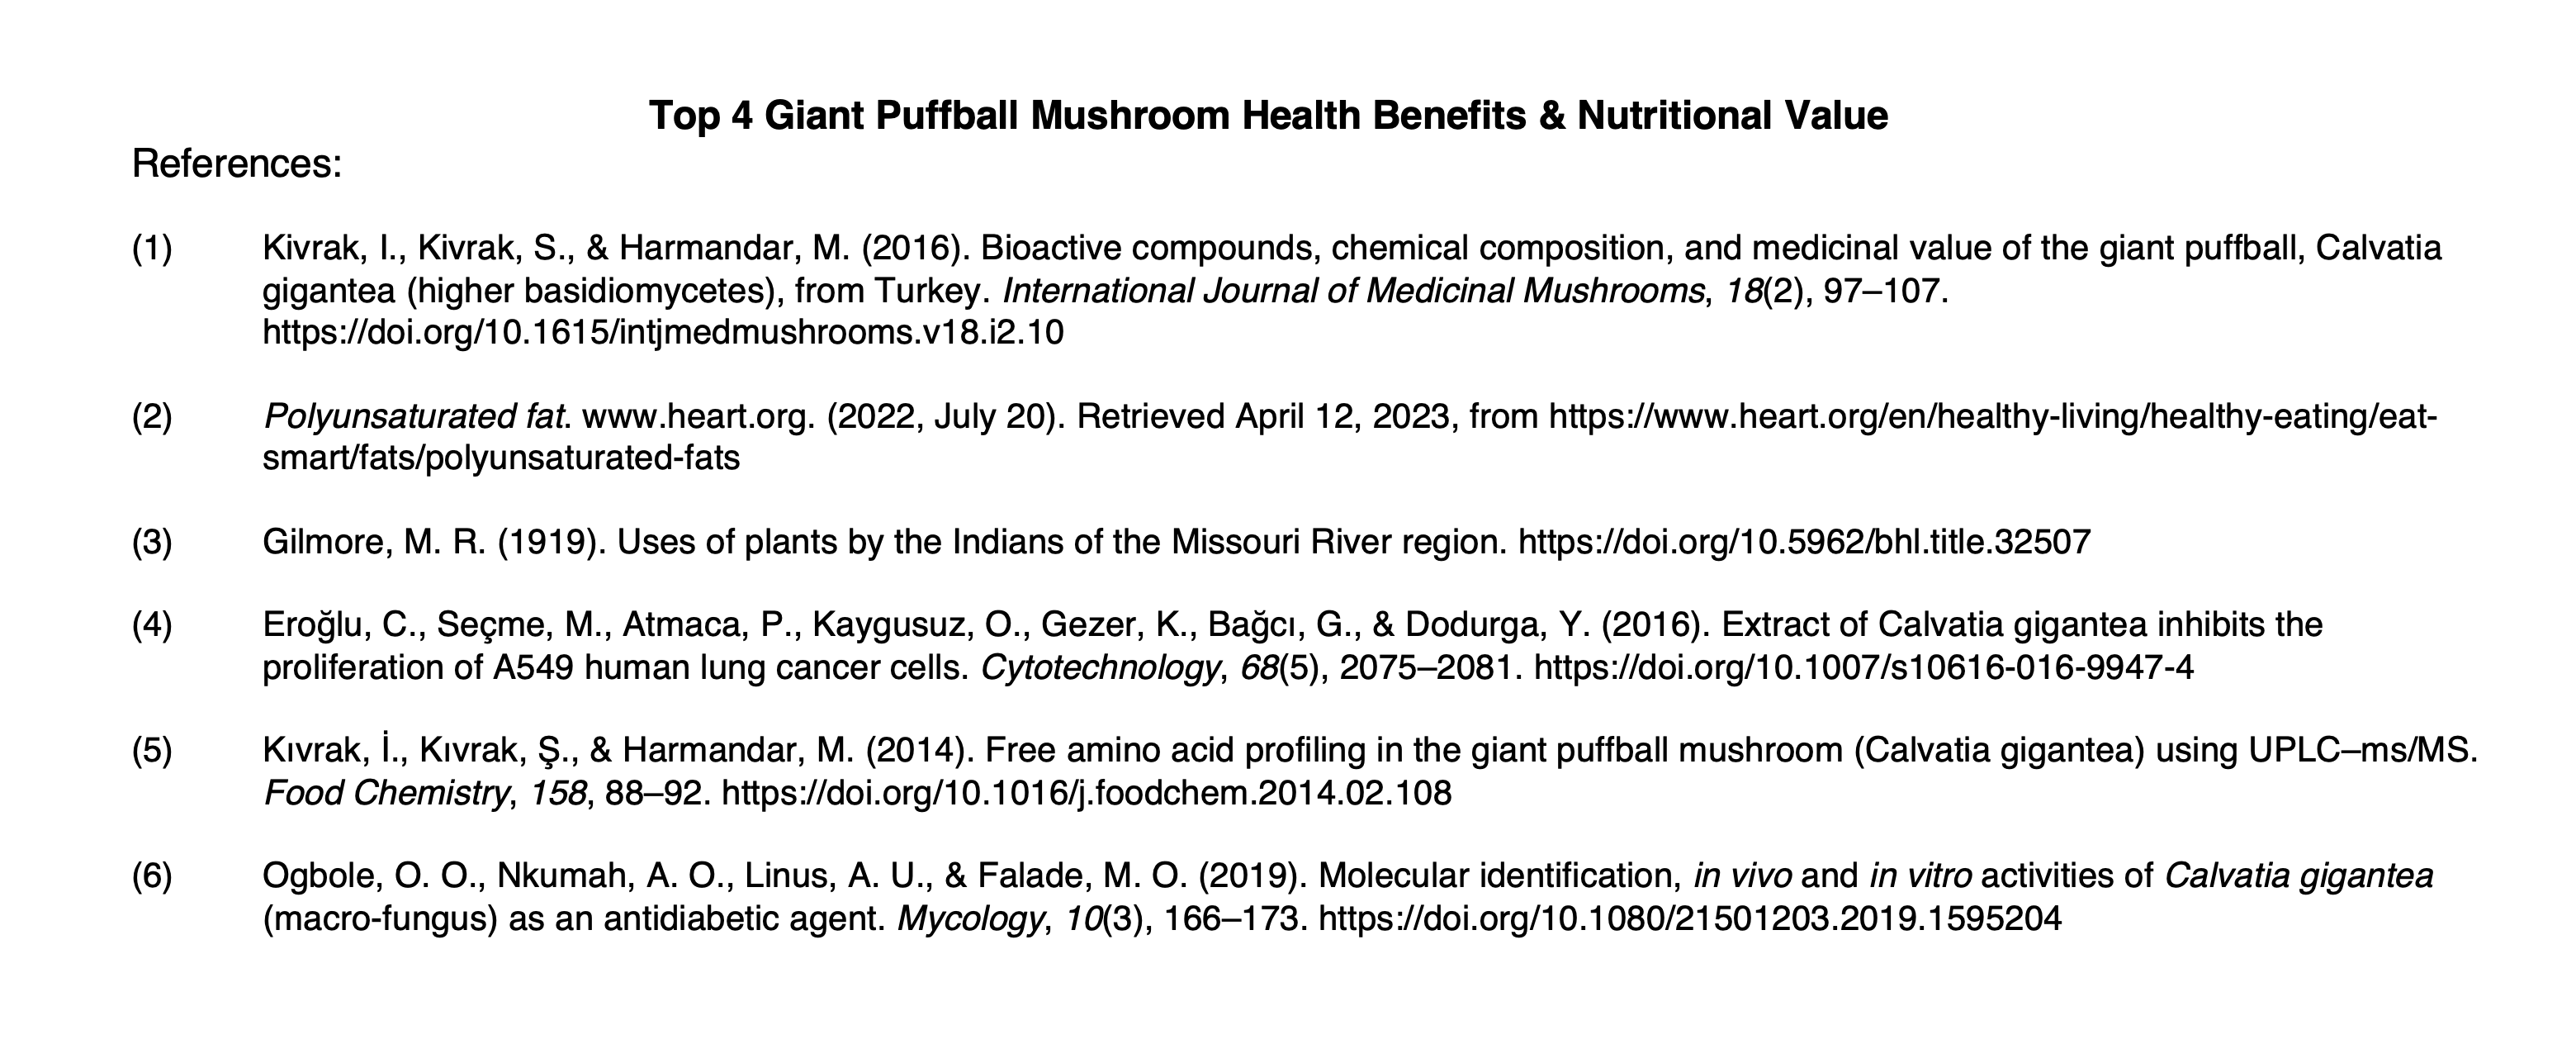 Top 4 Giant Puffball Mushroom Health Benefits & Nutritional Value - Source or References